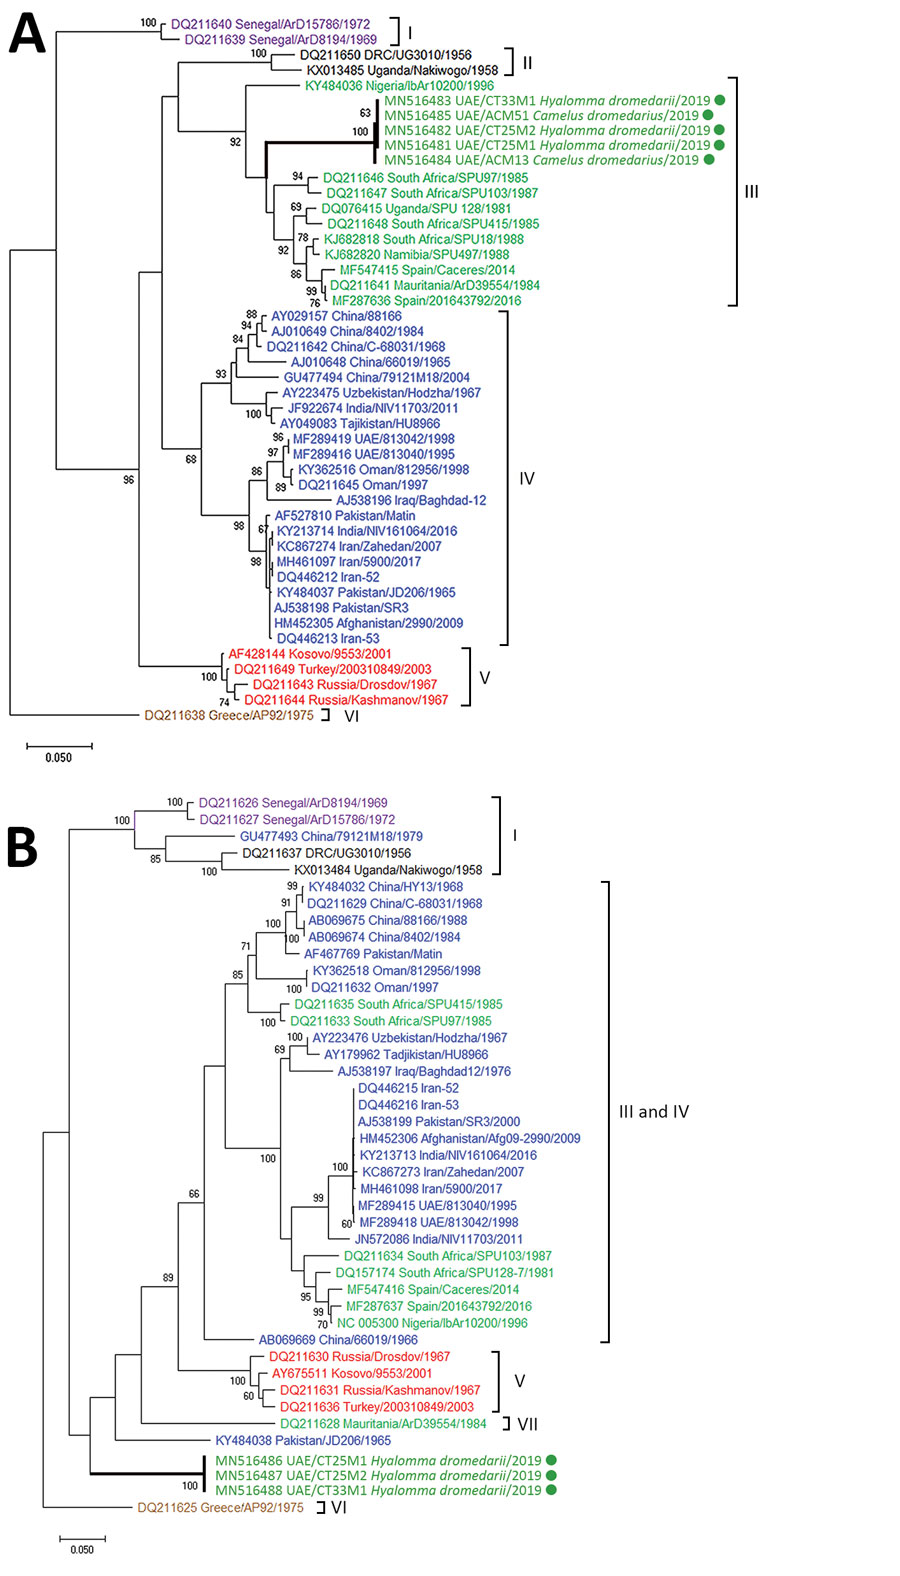 Molecular phylogeny of Crimean-Congo hemorrhagic fever viruses from dromedary camel serum samples and ticks (green circles, thick branches), United Arab Emirates, 2019. A maximum-likelihood analysis of a 492-nt sequence of the viral small (S) segment (A) and 672-nt sequence of the viral medium (M) segment (B) were performed. Viruses are labeled by GenBank accession number, country of origin, isolate name, and year of identification and are colored according to S segment lineages following the gr